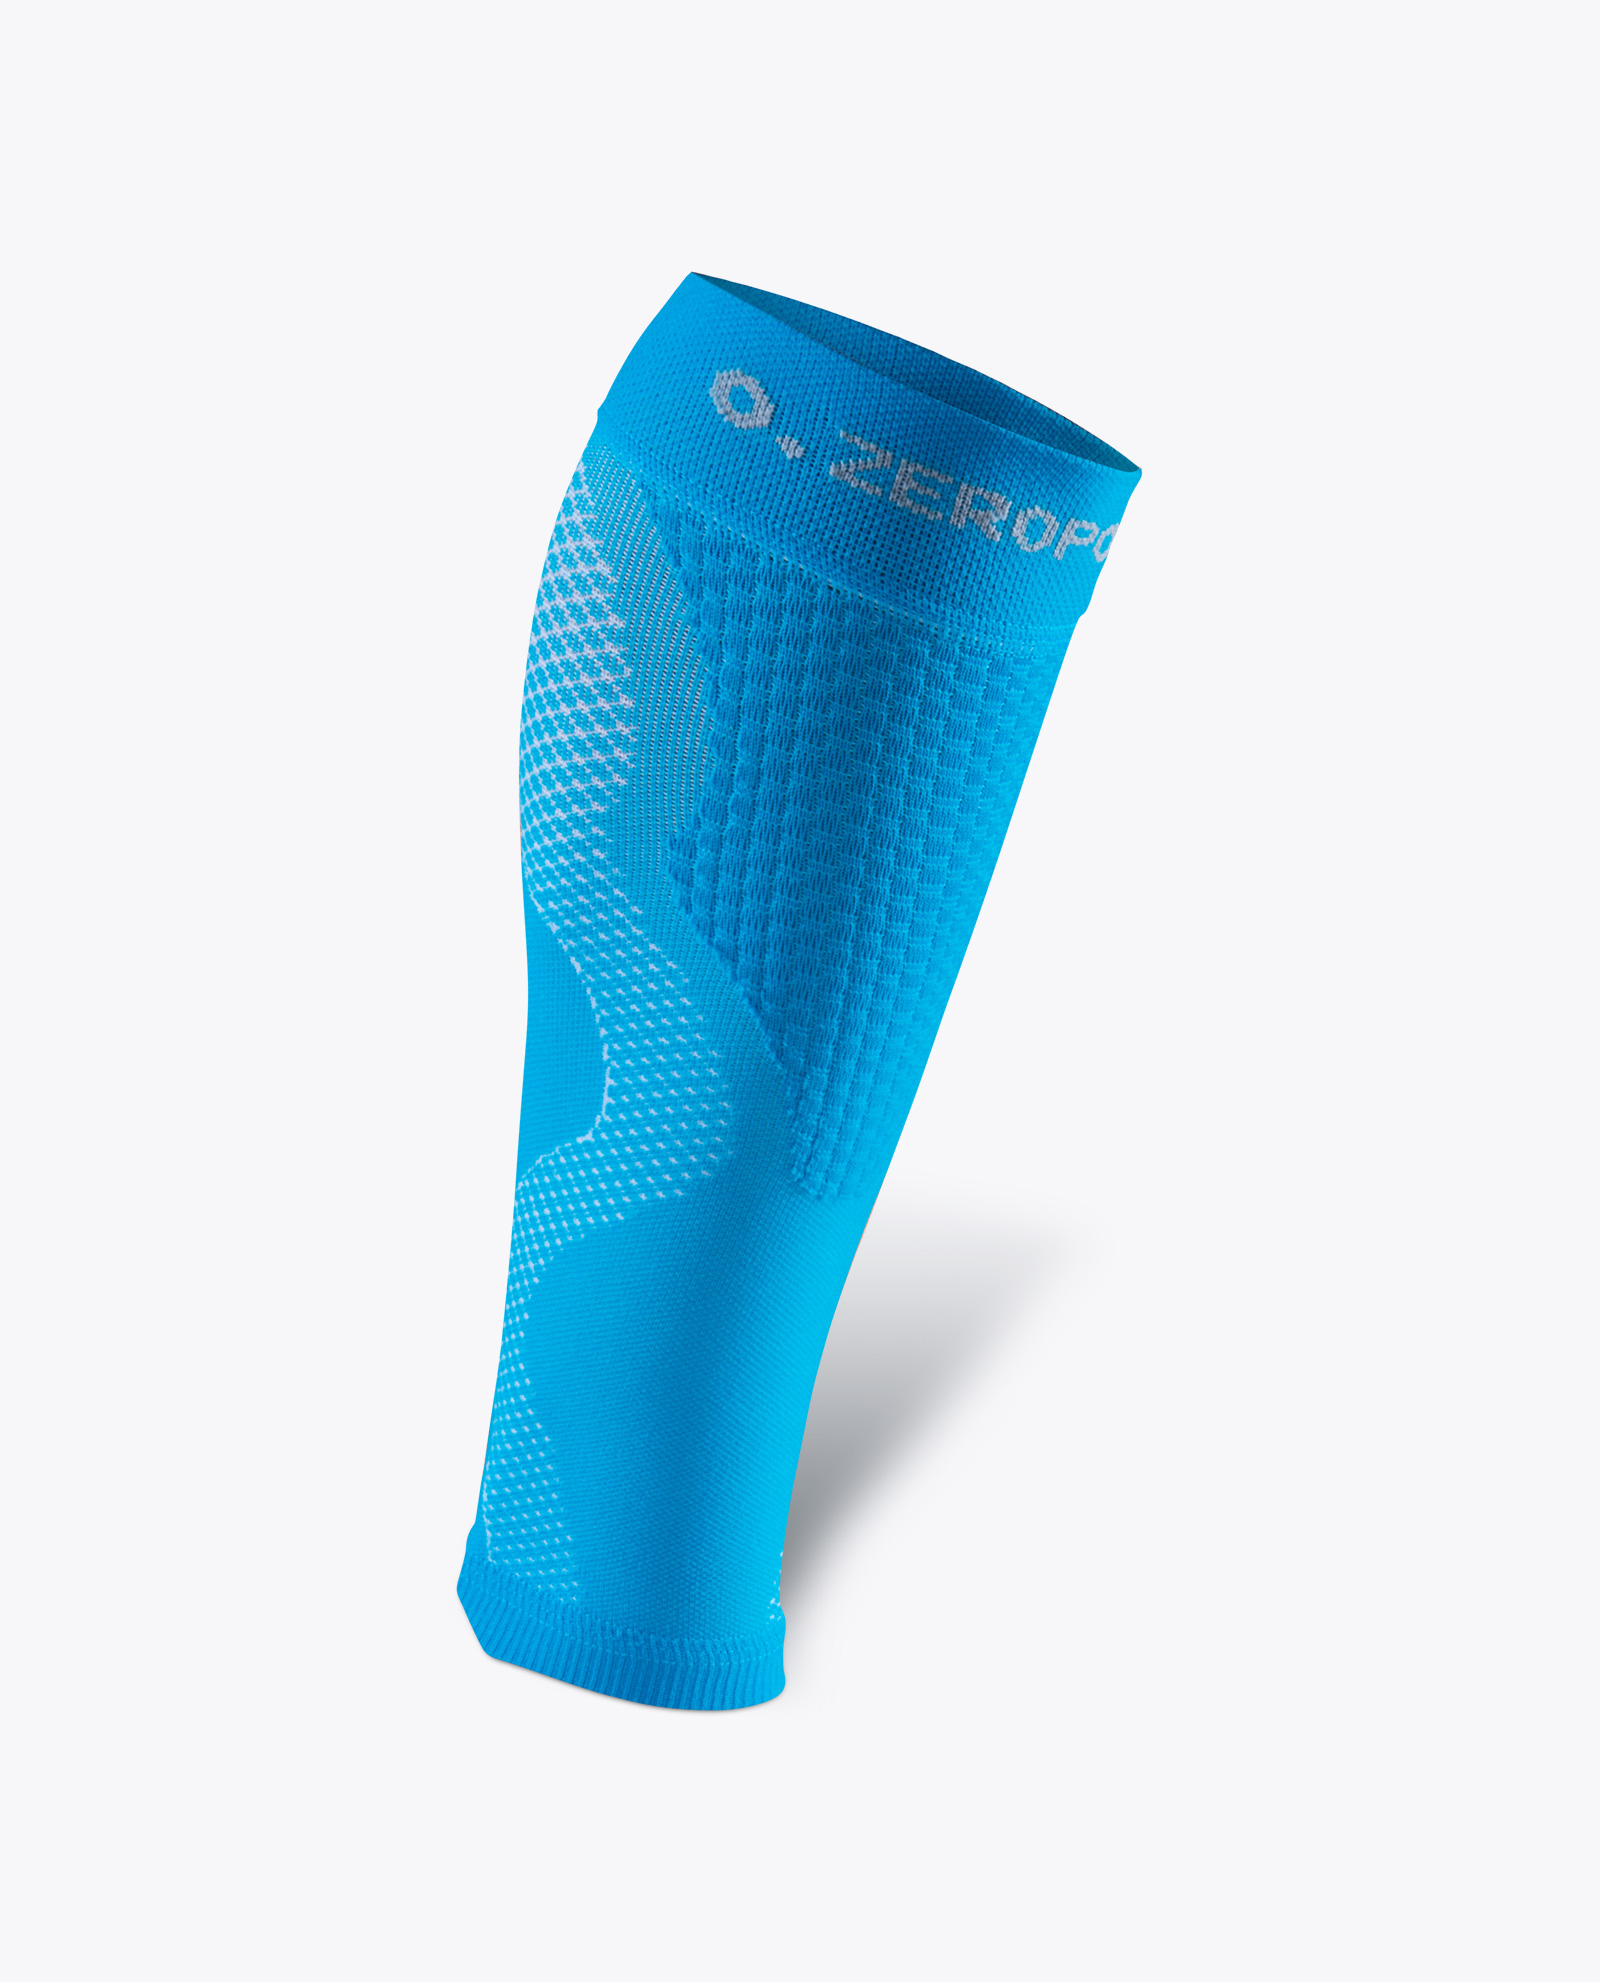 Calf Sleeve OX, white - Zeropoint Compression Calf Sleeves